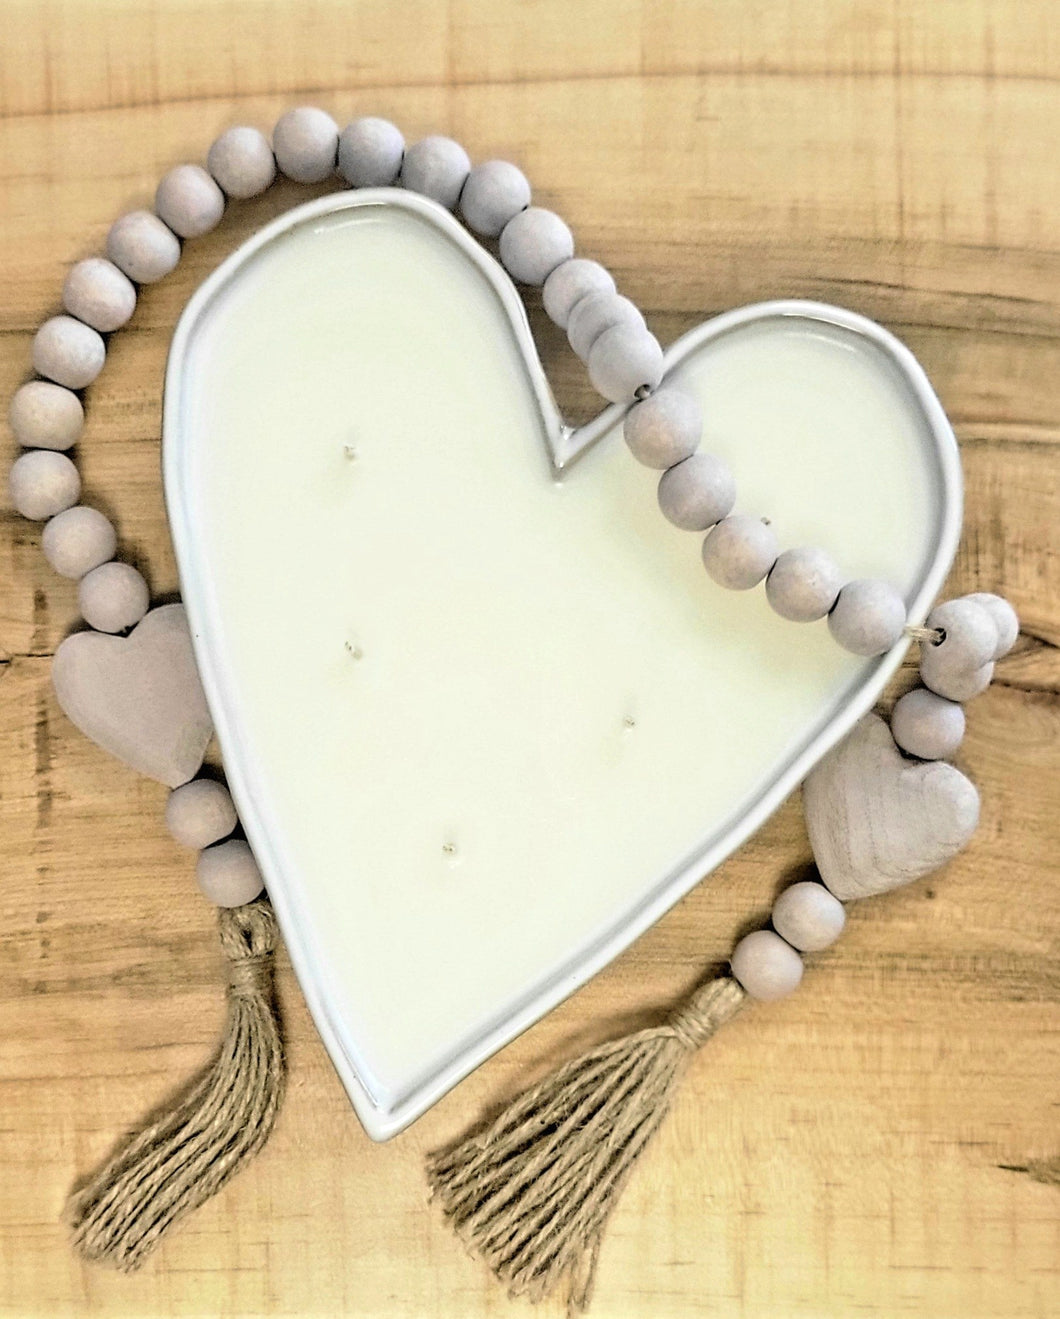 Heart Bowl Candle